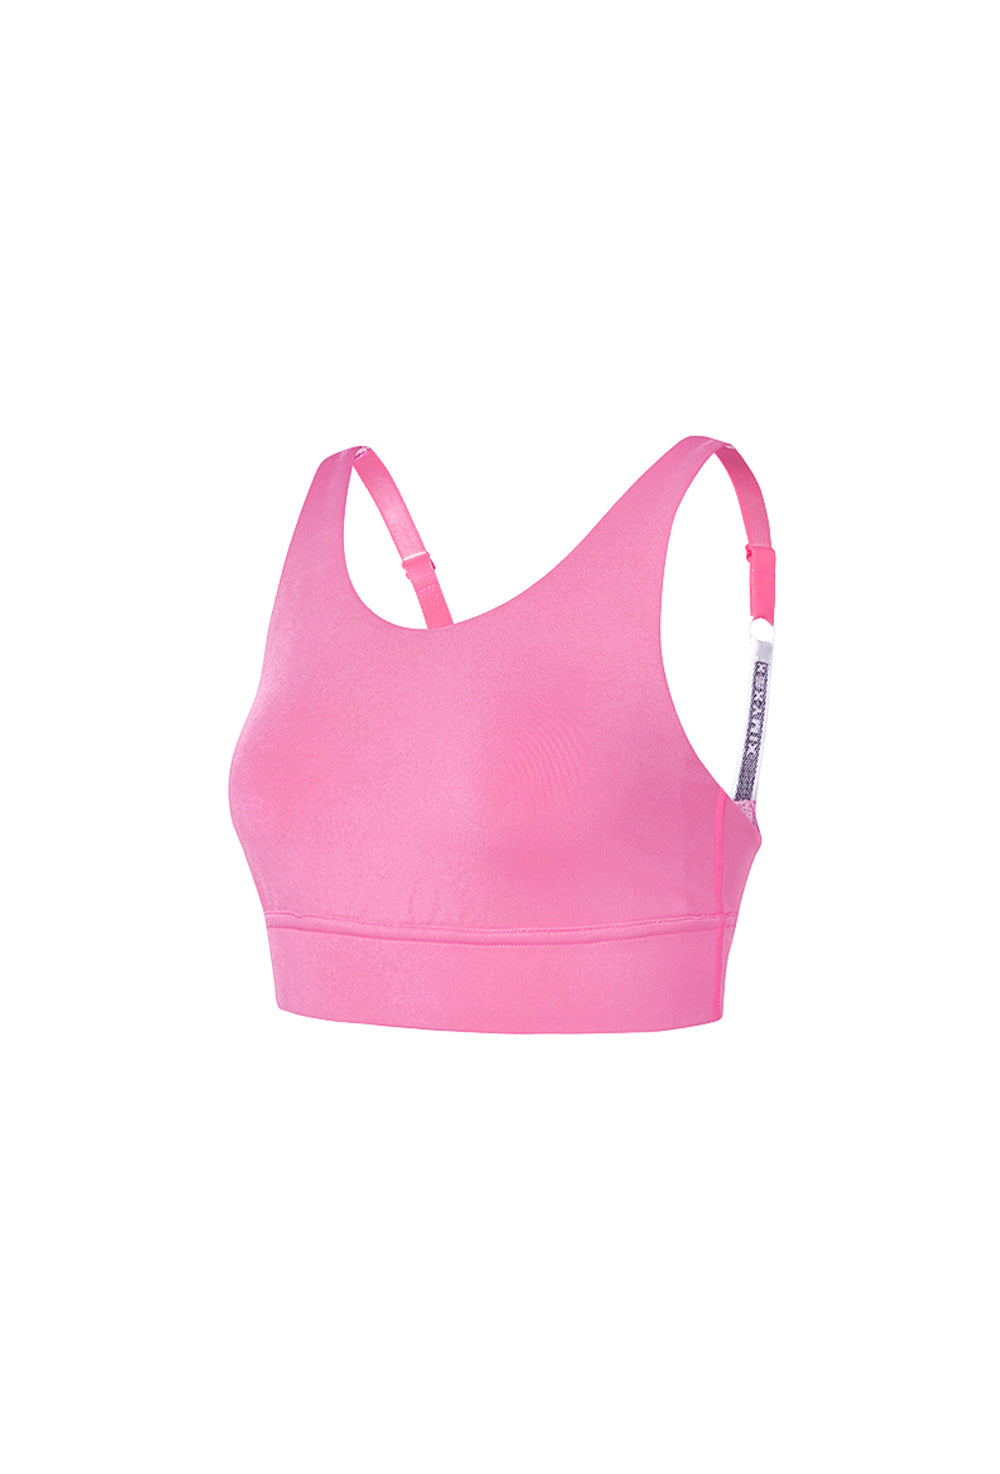 XELLA Intention Two-way Bra Top - Cutie Pink (Clearance)